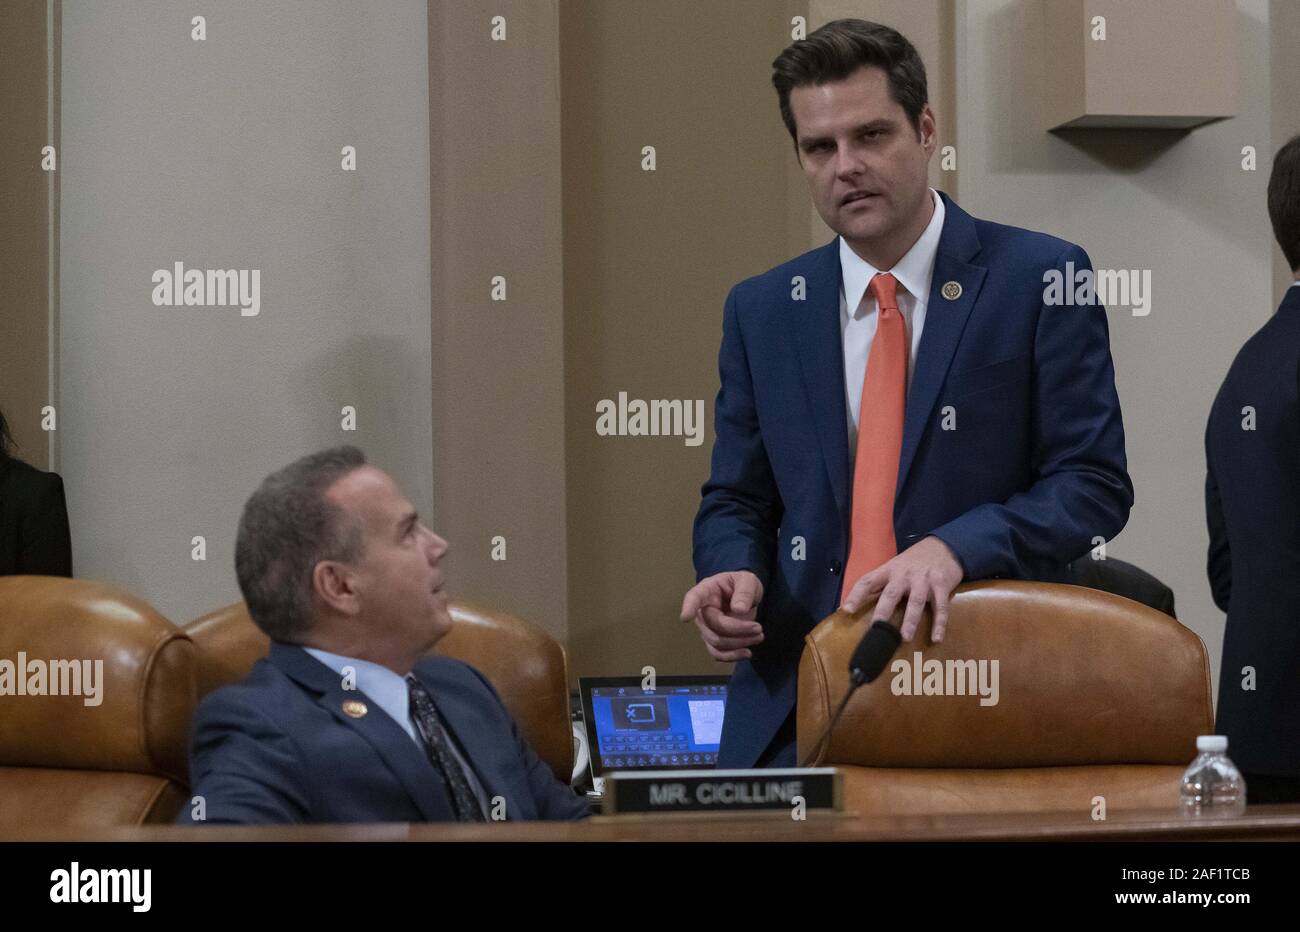 Washington, District of Columbia, USA. 11th Dec, 2019. United States Representative David Cicilline (Democrat of Rhode Island), left, and US Representative Matt Gaetz (Republican of Florida), right, confer prior to hearing opening statements as the US House Committee on the Judiciary begins its markup of House Resolution 755, Articles of Impeachment Against President Donald J. Trump, in the Longworth House Office Building in Washington, DC on Wednesday, December 11, 2019 Credit: Ron Sachs/CNP/ZUMA Wire/Alamy Live News Stock Photo